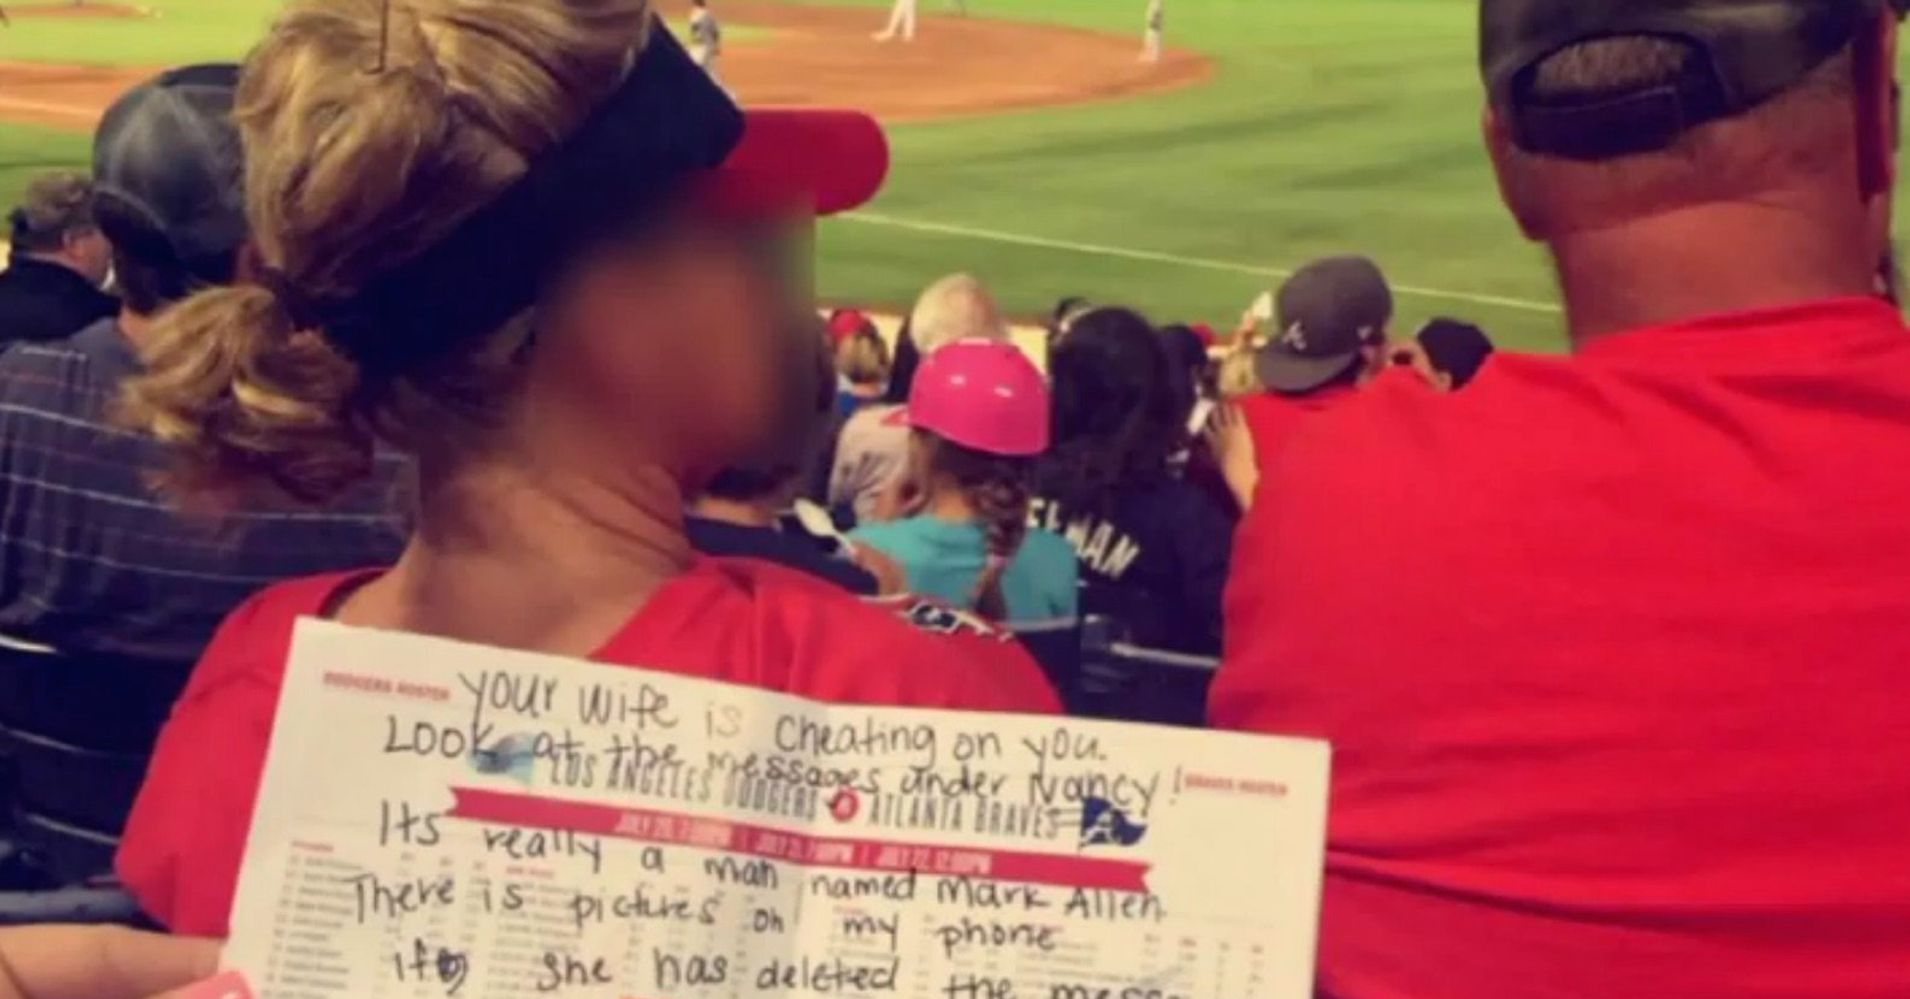 Cheating Wife Reportedly Busted While Sexting At A Baseball Game Huffpost 2923